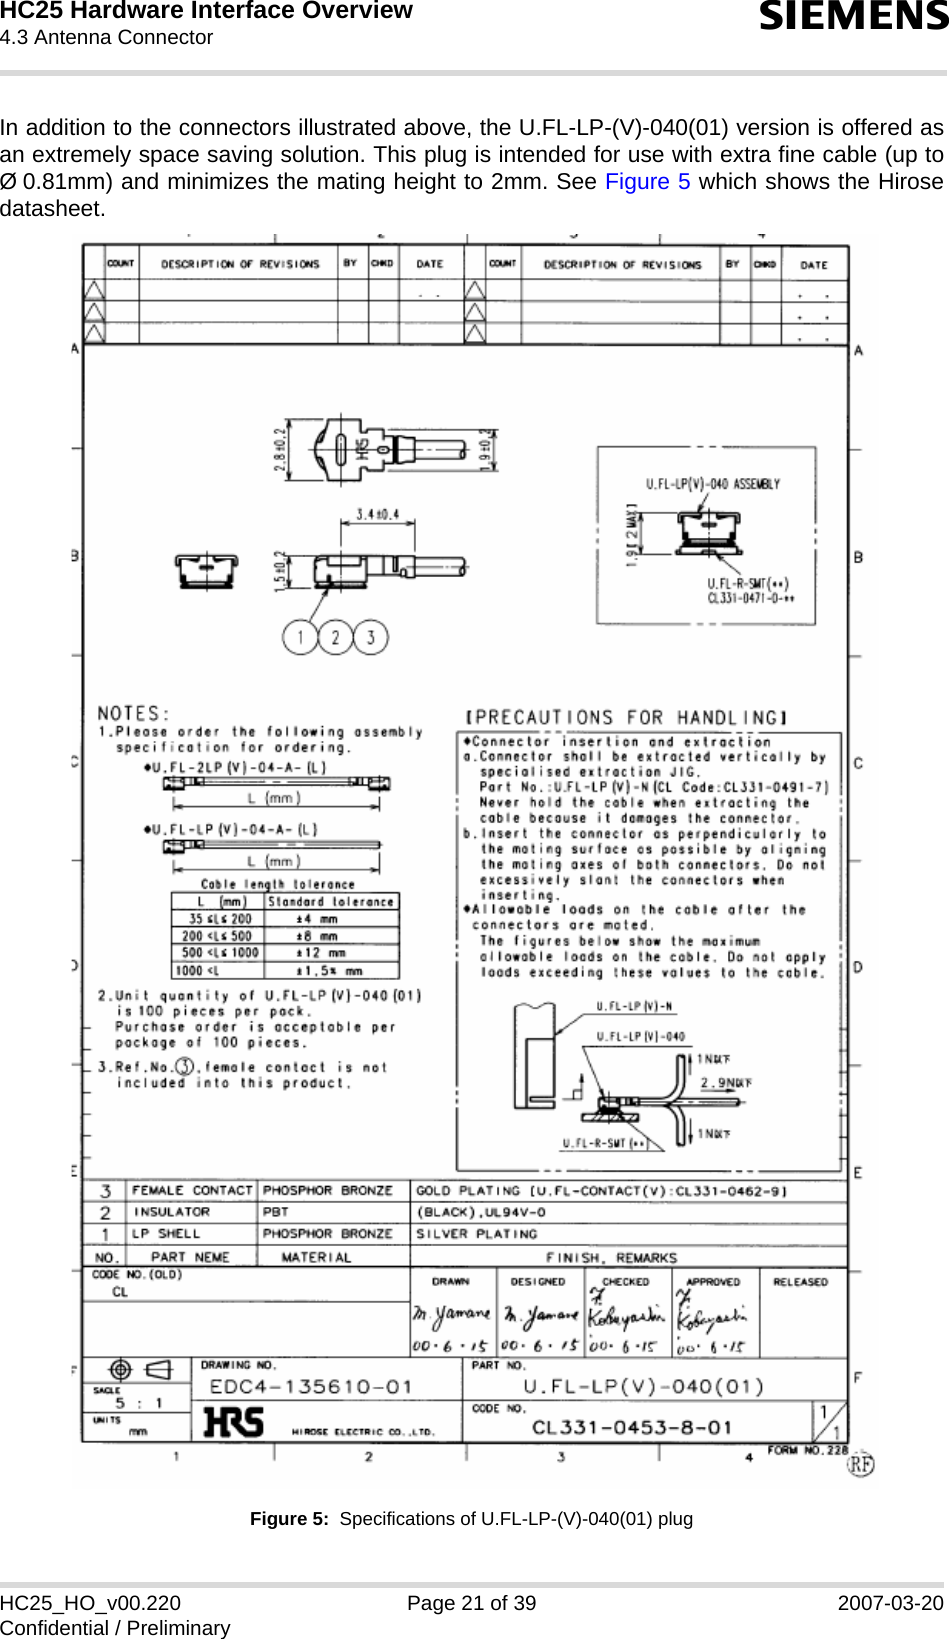 HC25 Hardware Interface Overview4.3 Antenna Connector22sHC25_HO_v00.220 Page 21 of 39 2007-03-20Confidential / PreliminaryIn addition to the connectors illustrated above, the U.FL-LP-(V)-040(01) version is offered asan extremely space saving solution. This plug is intended for use with extra fine cable (up toØ 0.81mm) and minimizes the mating height to 2mm. See Figure 5 which shows the Hirosedatasheet.Figure 5:  Specifications of U.FL-LP-(V)-040(01) plug